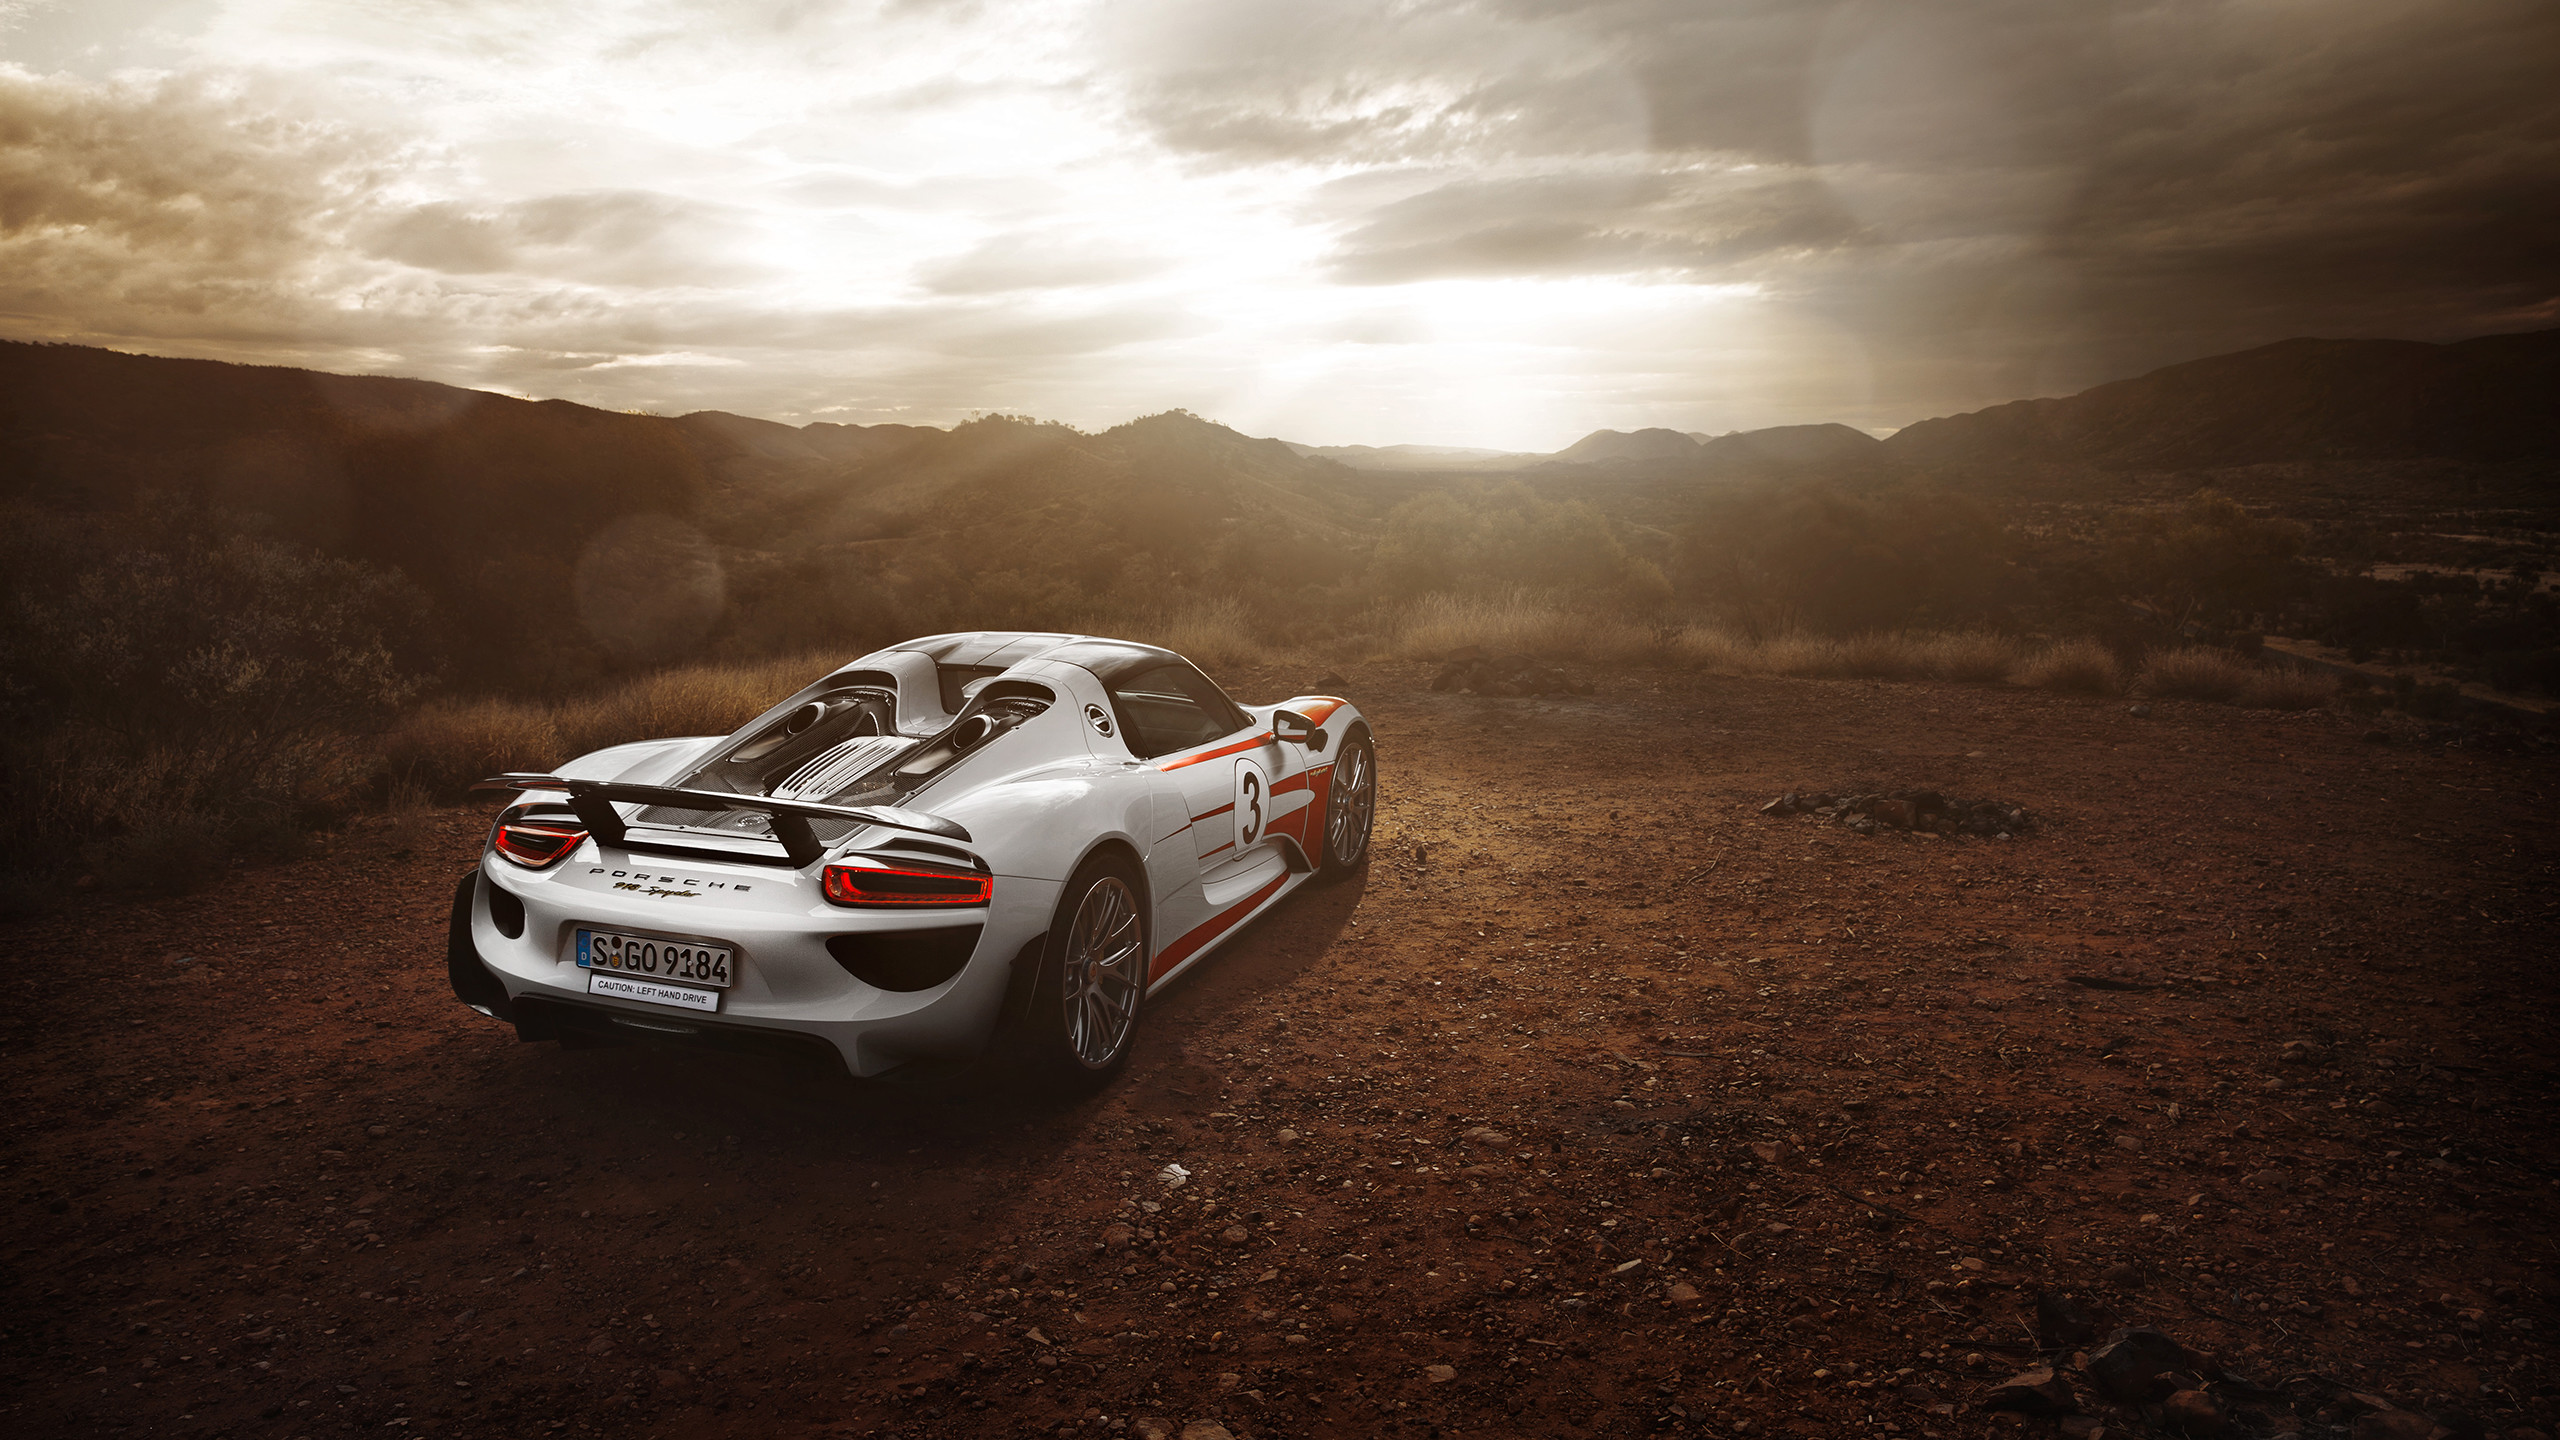 2560x1440 Porsche 918 in the outback